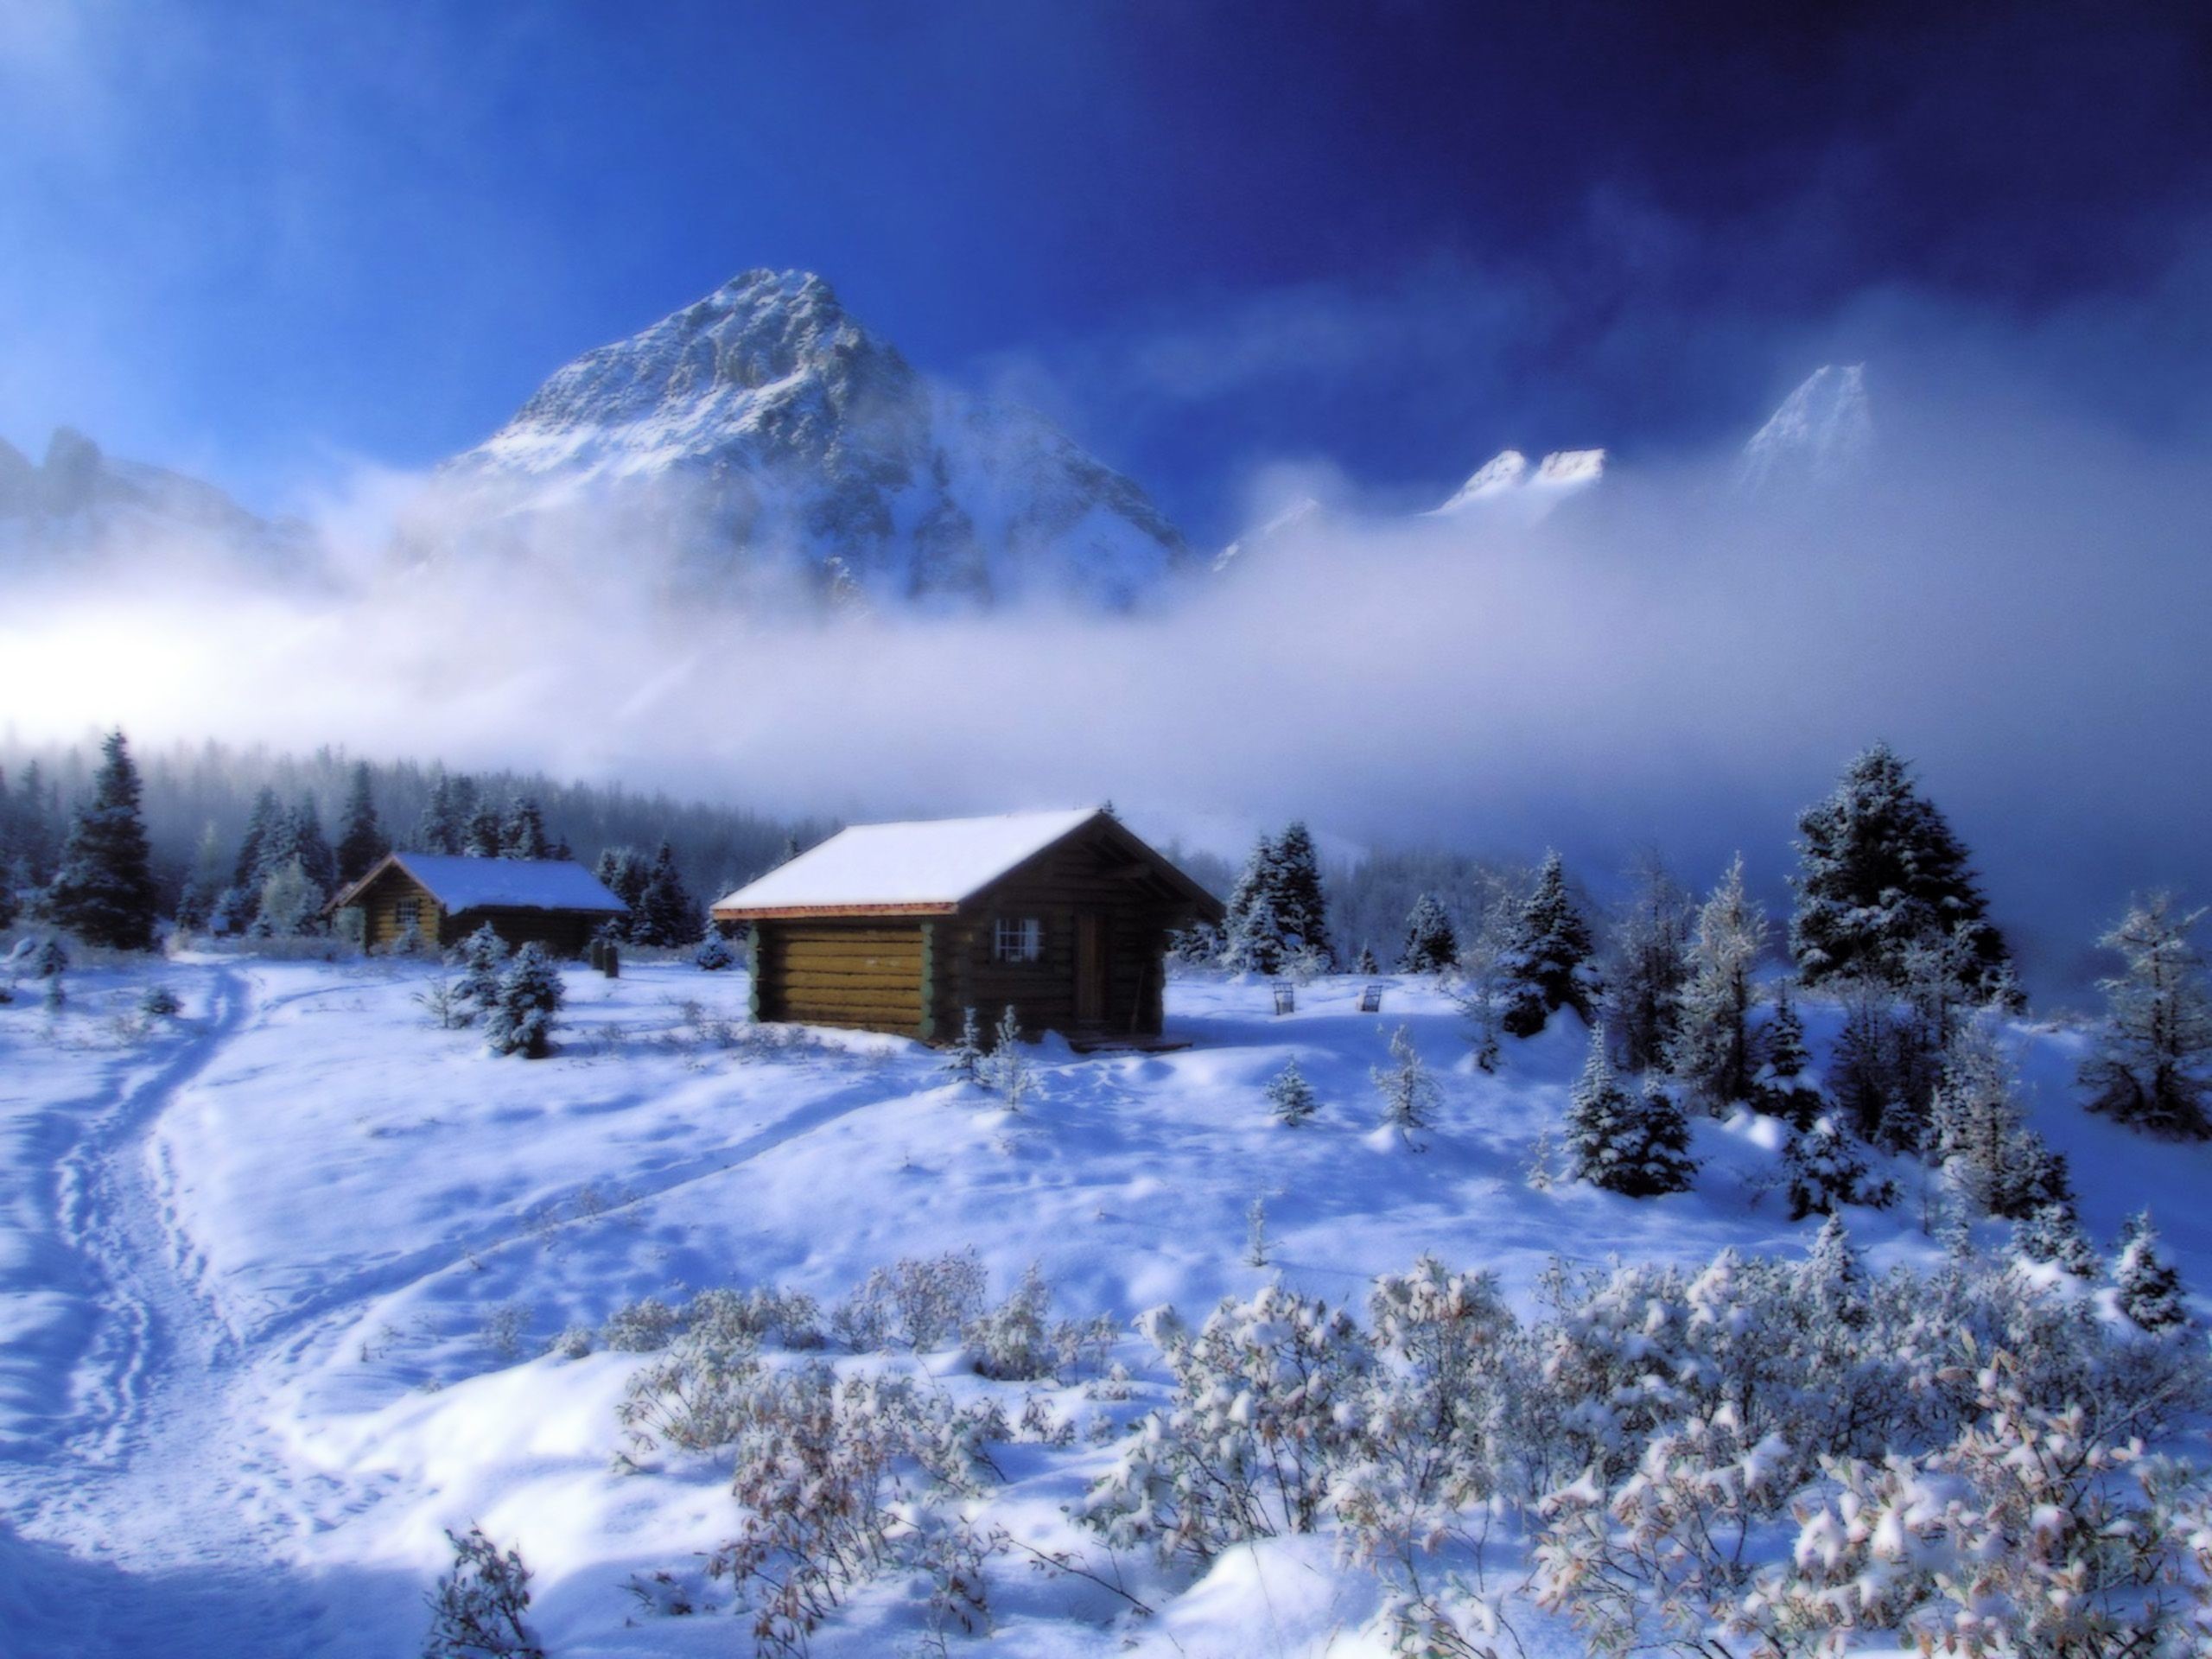 2560x1920 1920x1080 Tag: HQFX Farm Winter Scenes Desktop Wallpapers, Backgrounds and  Pictures for Free, Flora